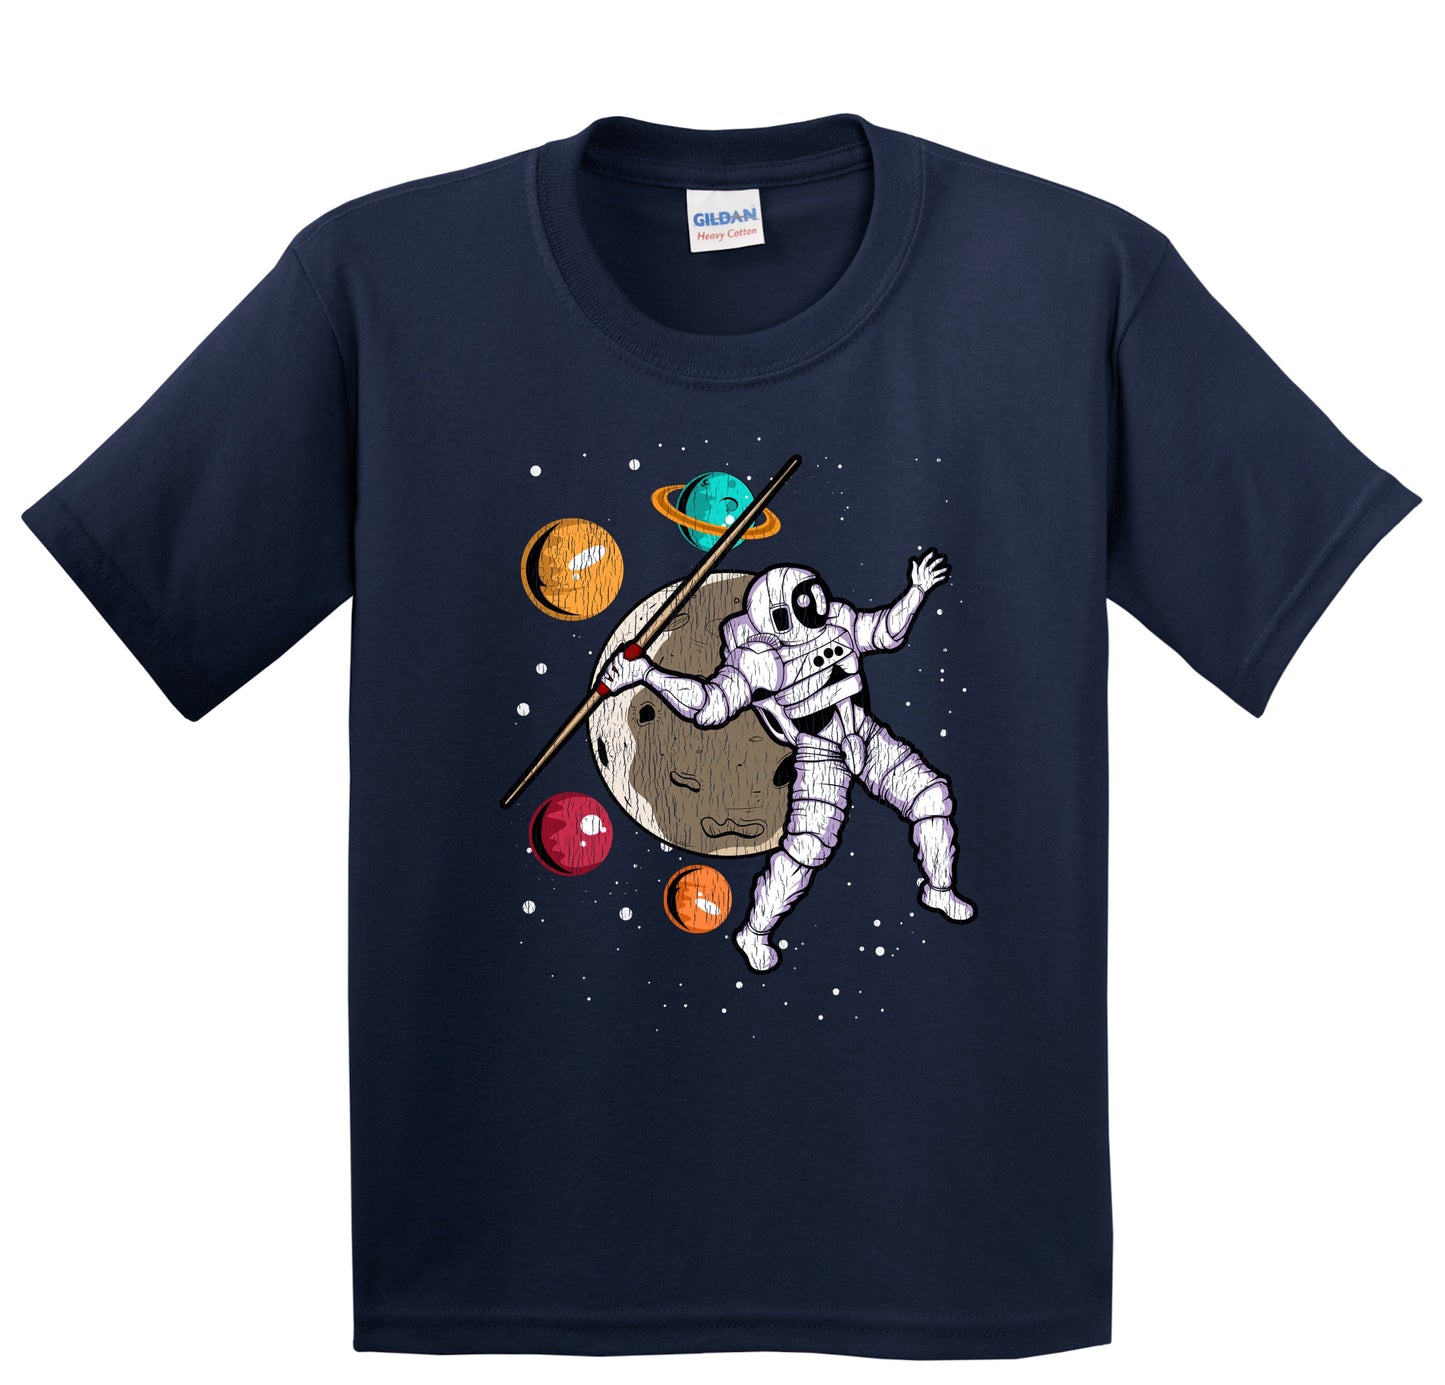 Javelin Throw Astronaut Outer Space Spaceman Track and Field Distressed Youth T-Shirt